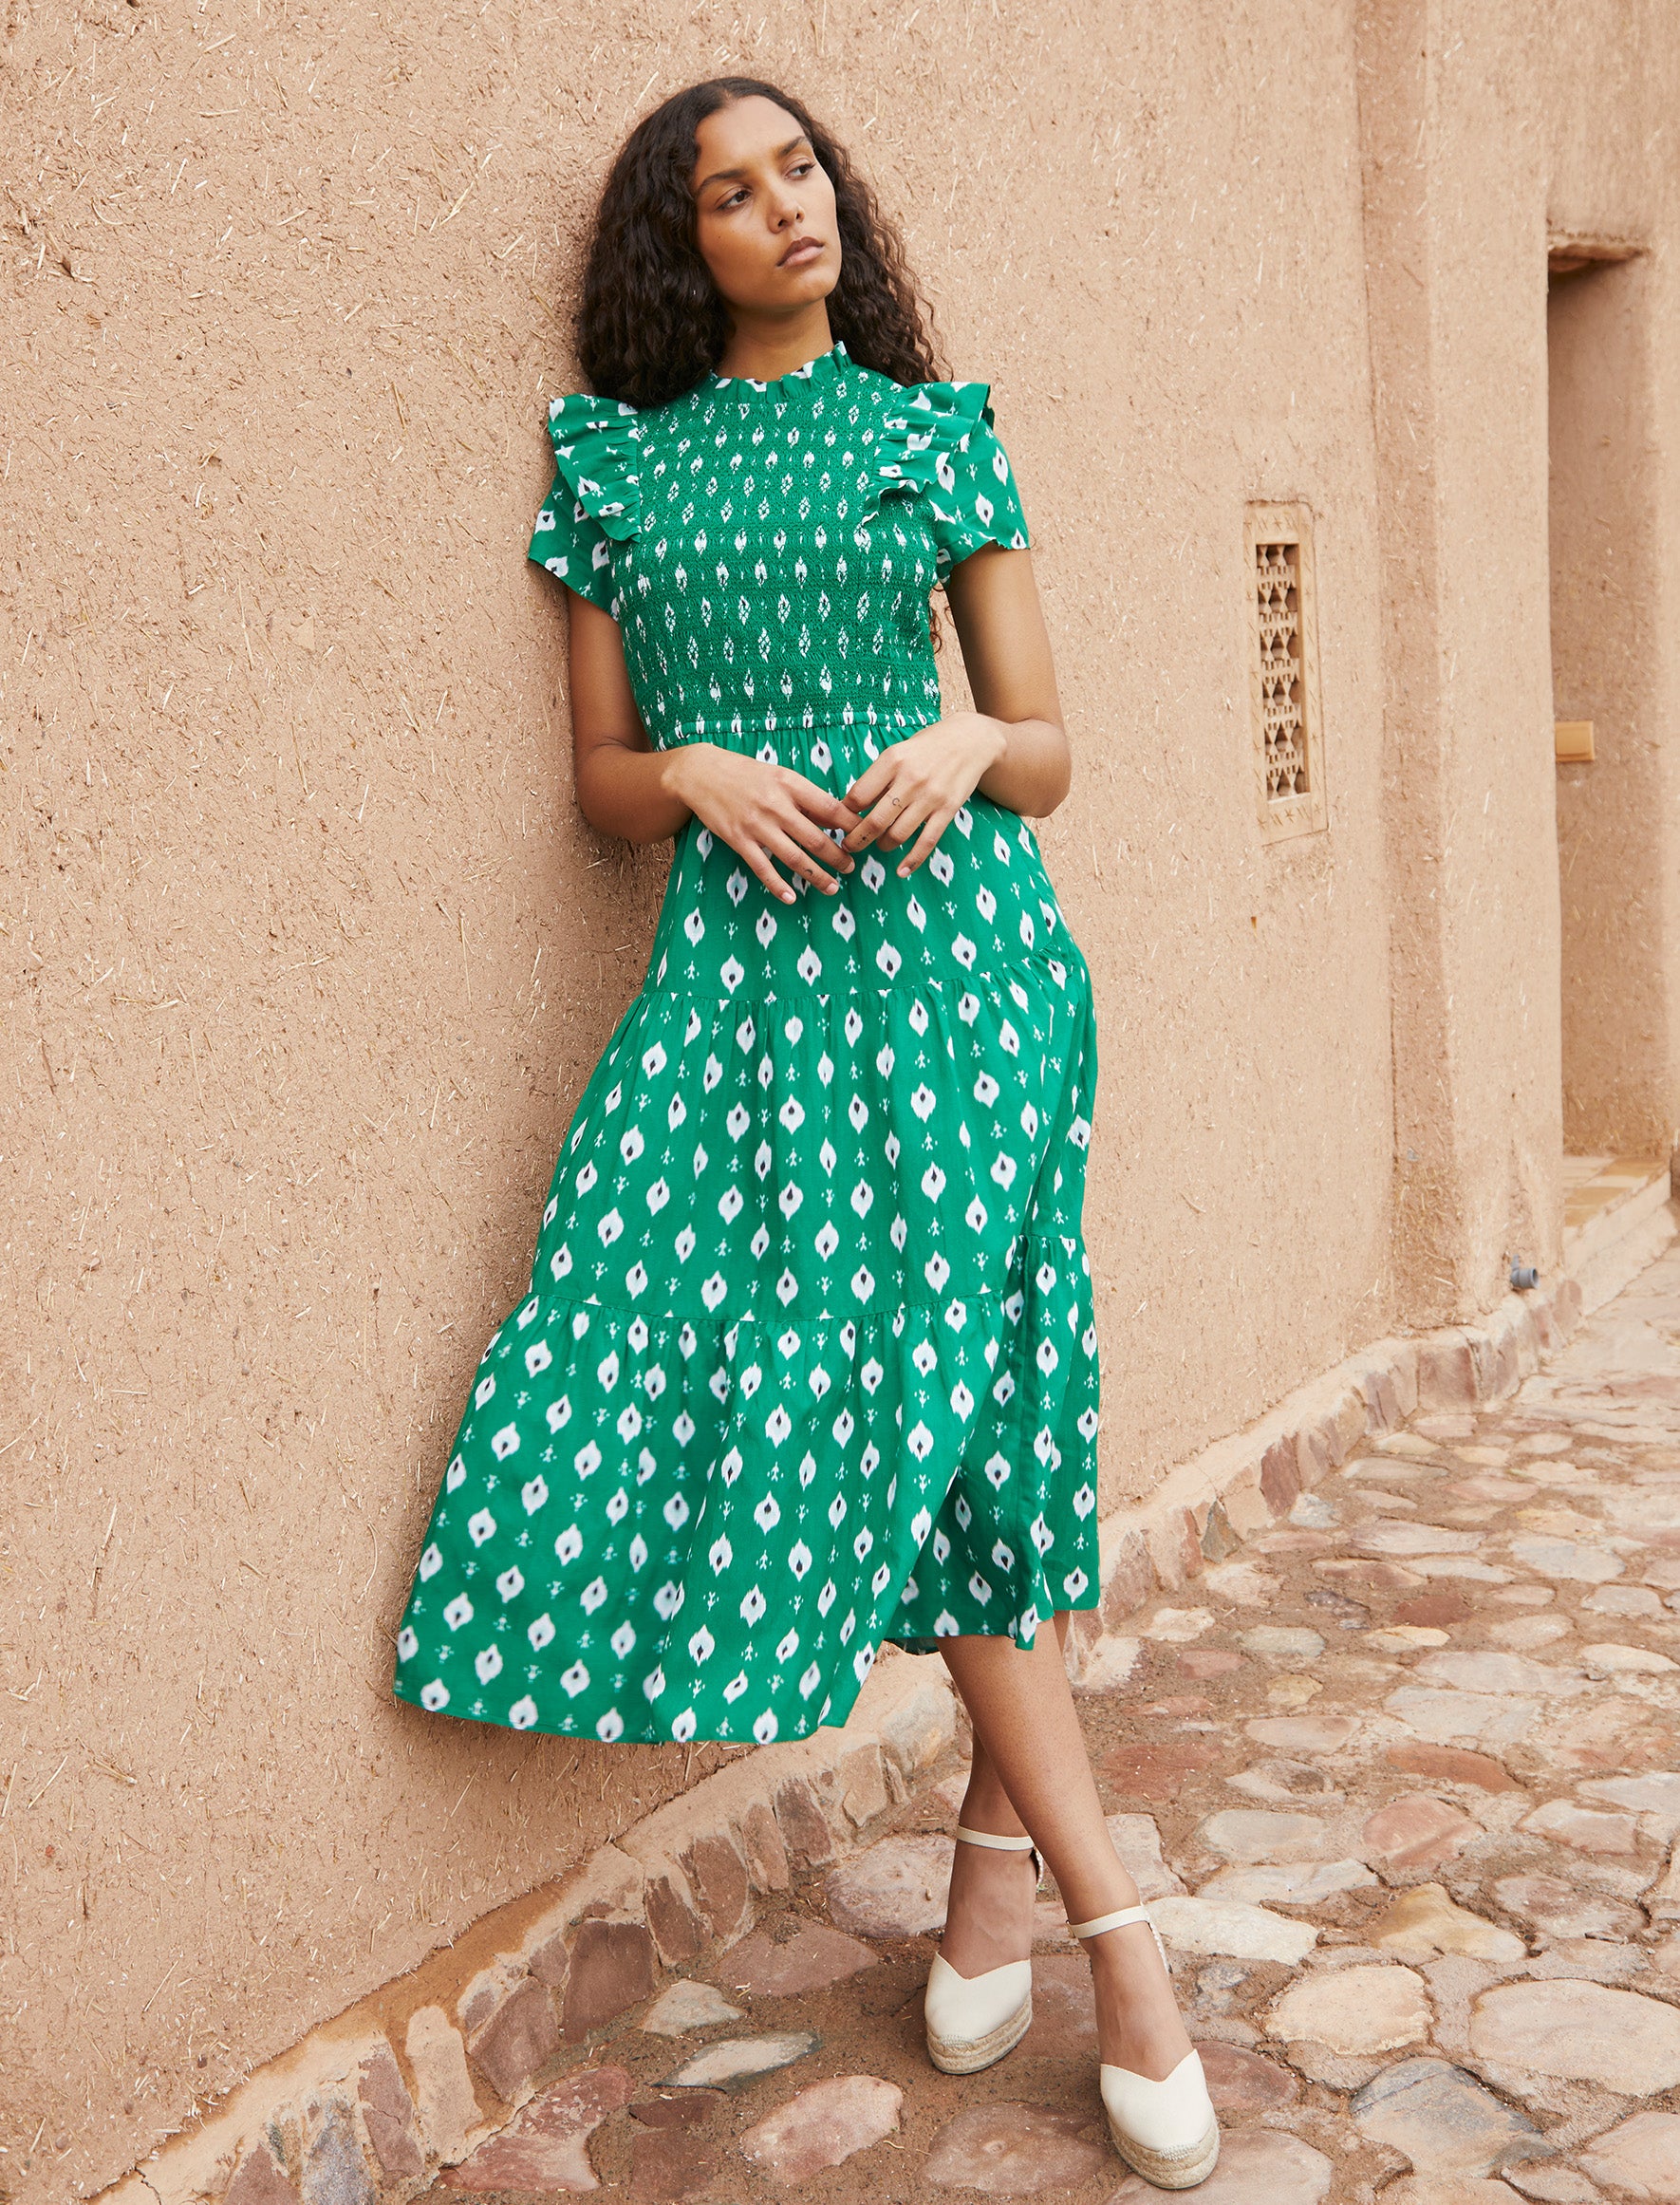 Cotton Print Ikat Shirred Embroidered - Tiered with Visose Green Bodice Dress Volie Sabrina Maxi